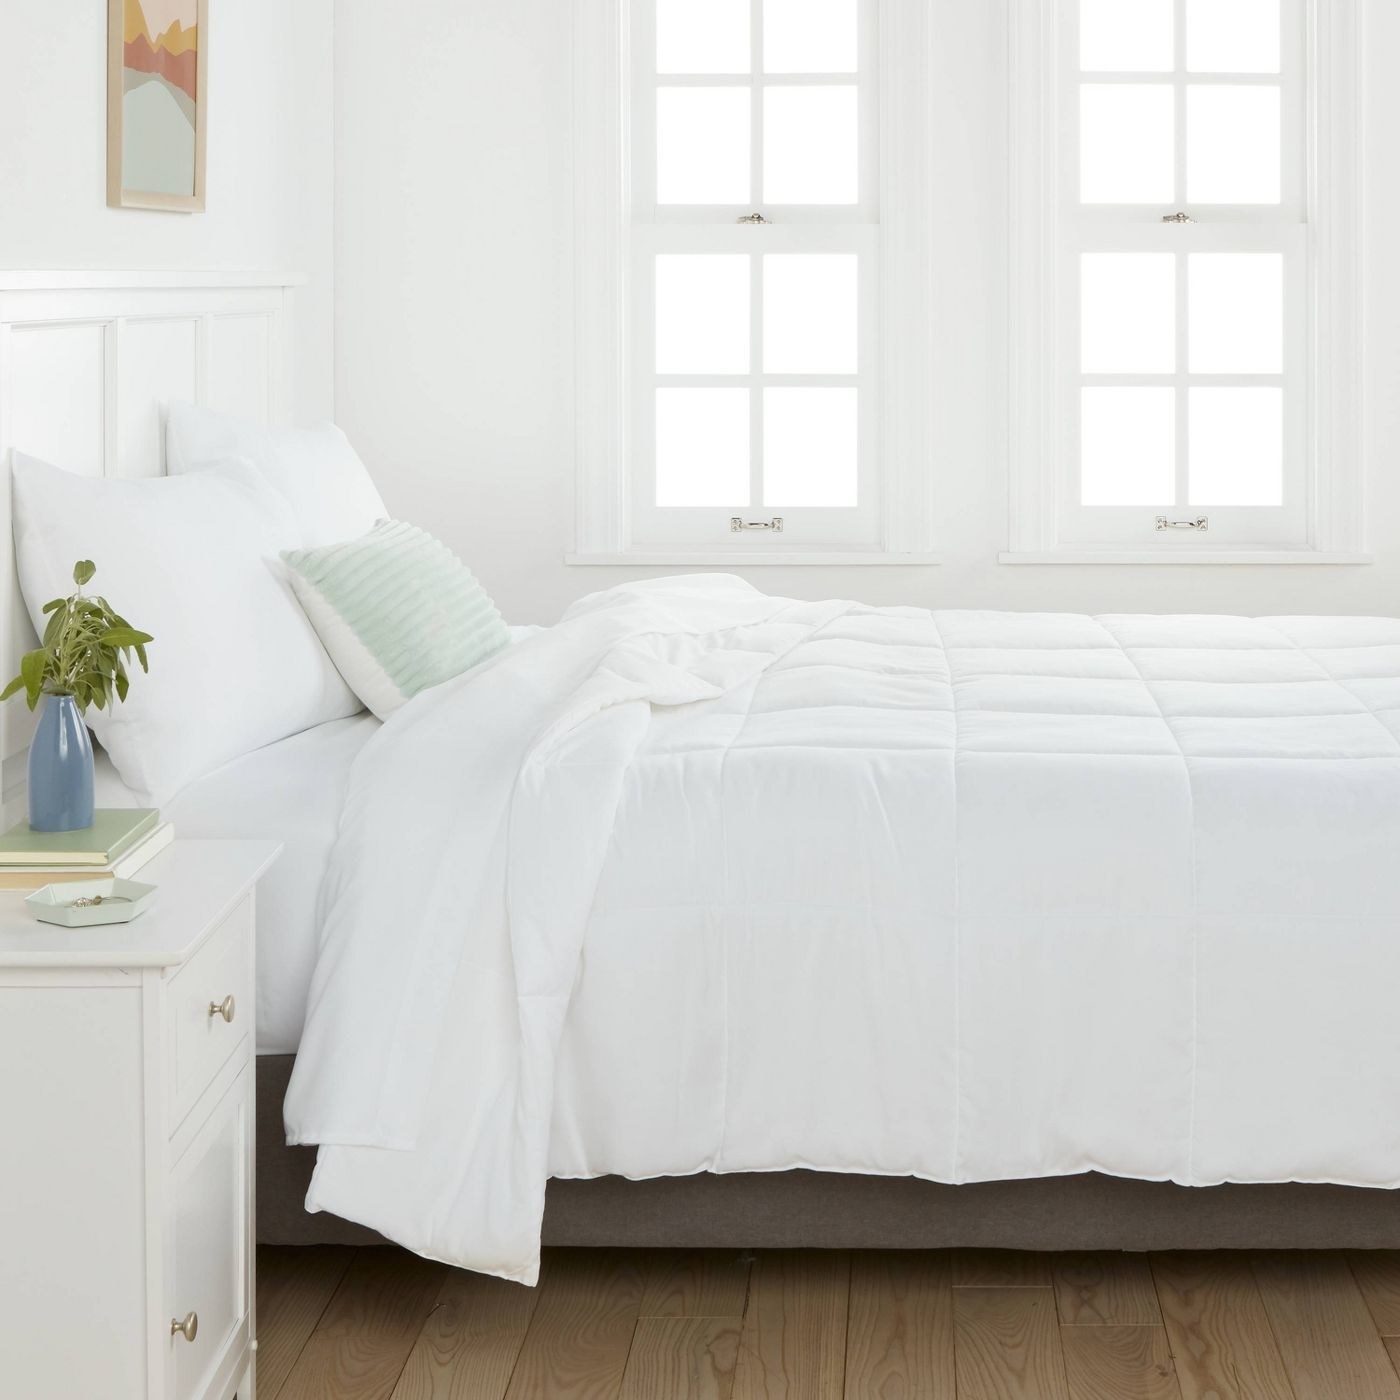 A white bedroom with an uncovered white duvet on the bed.